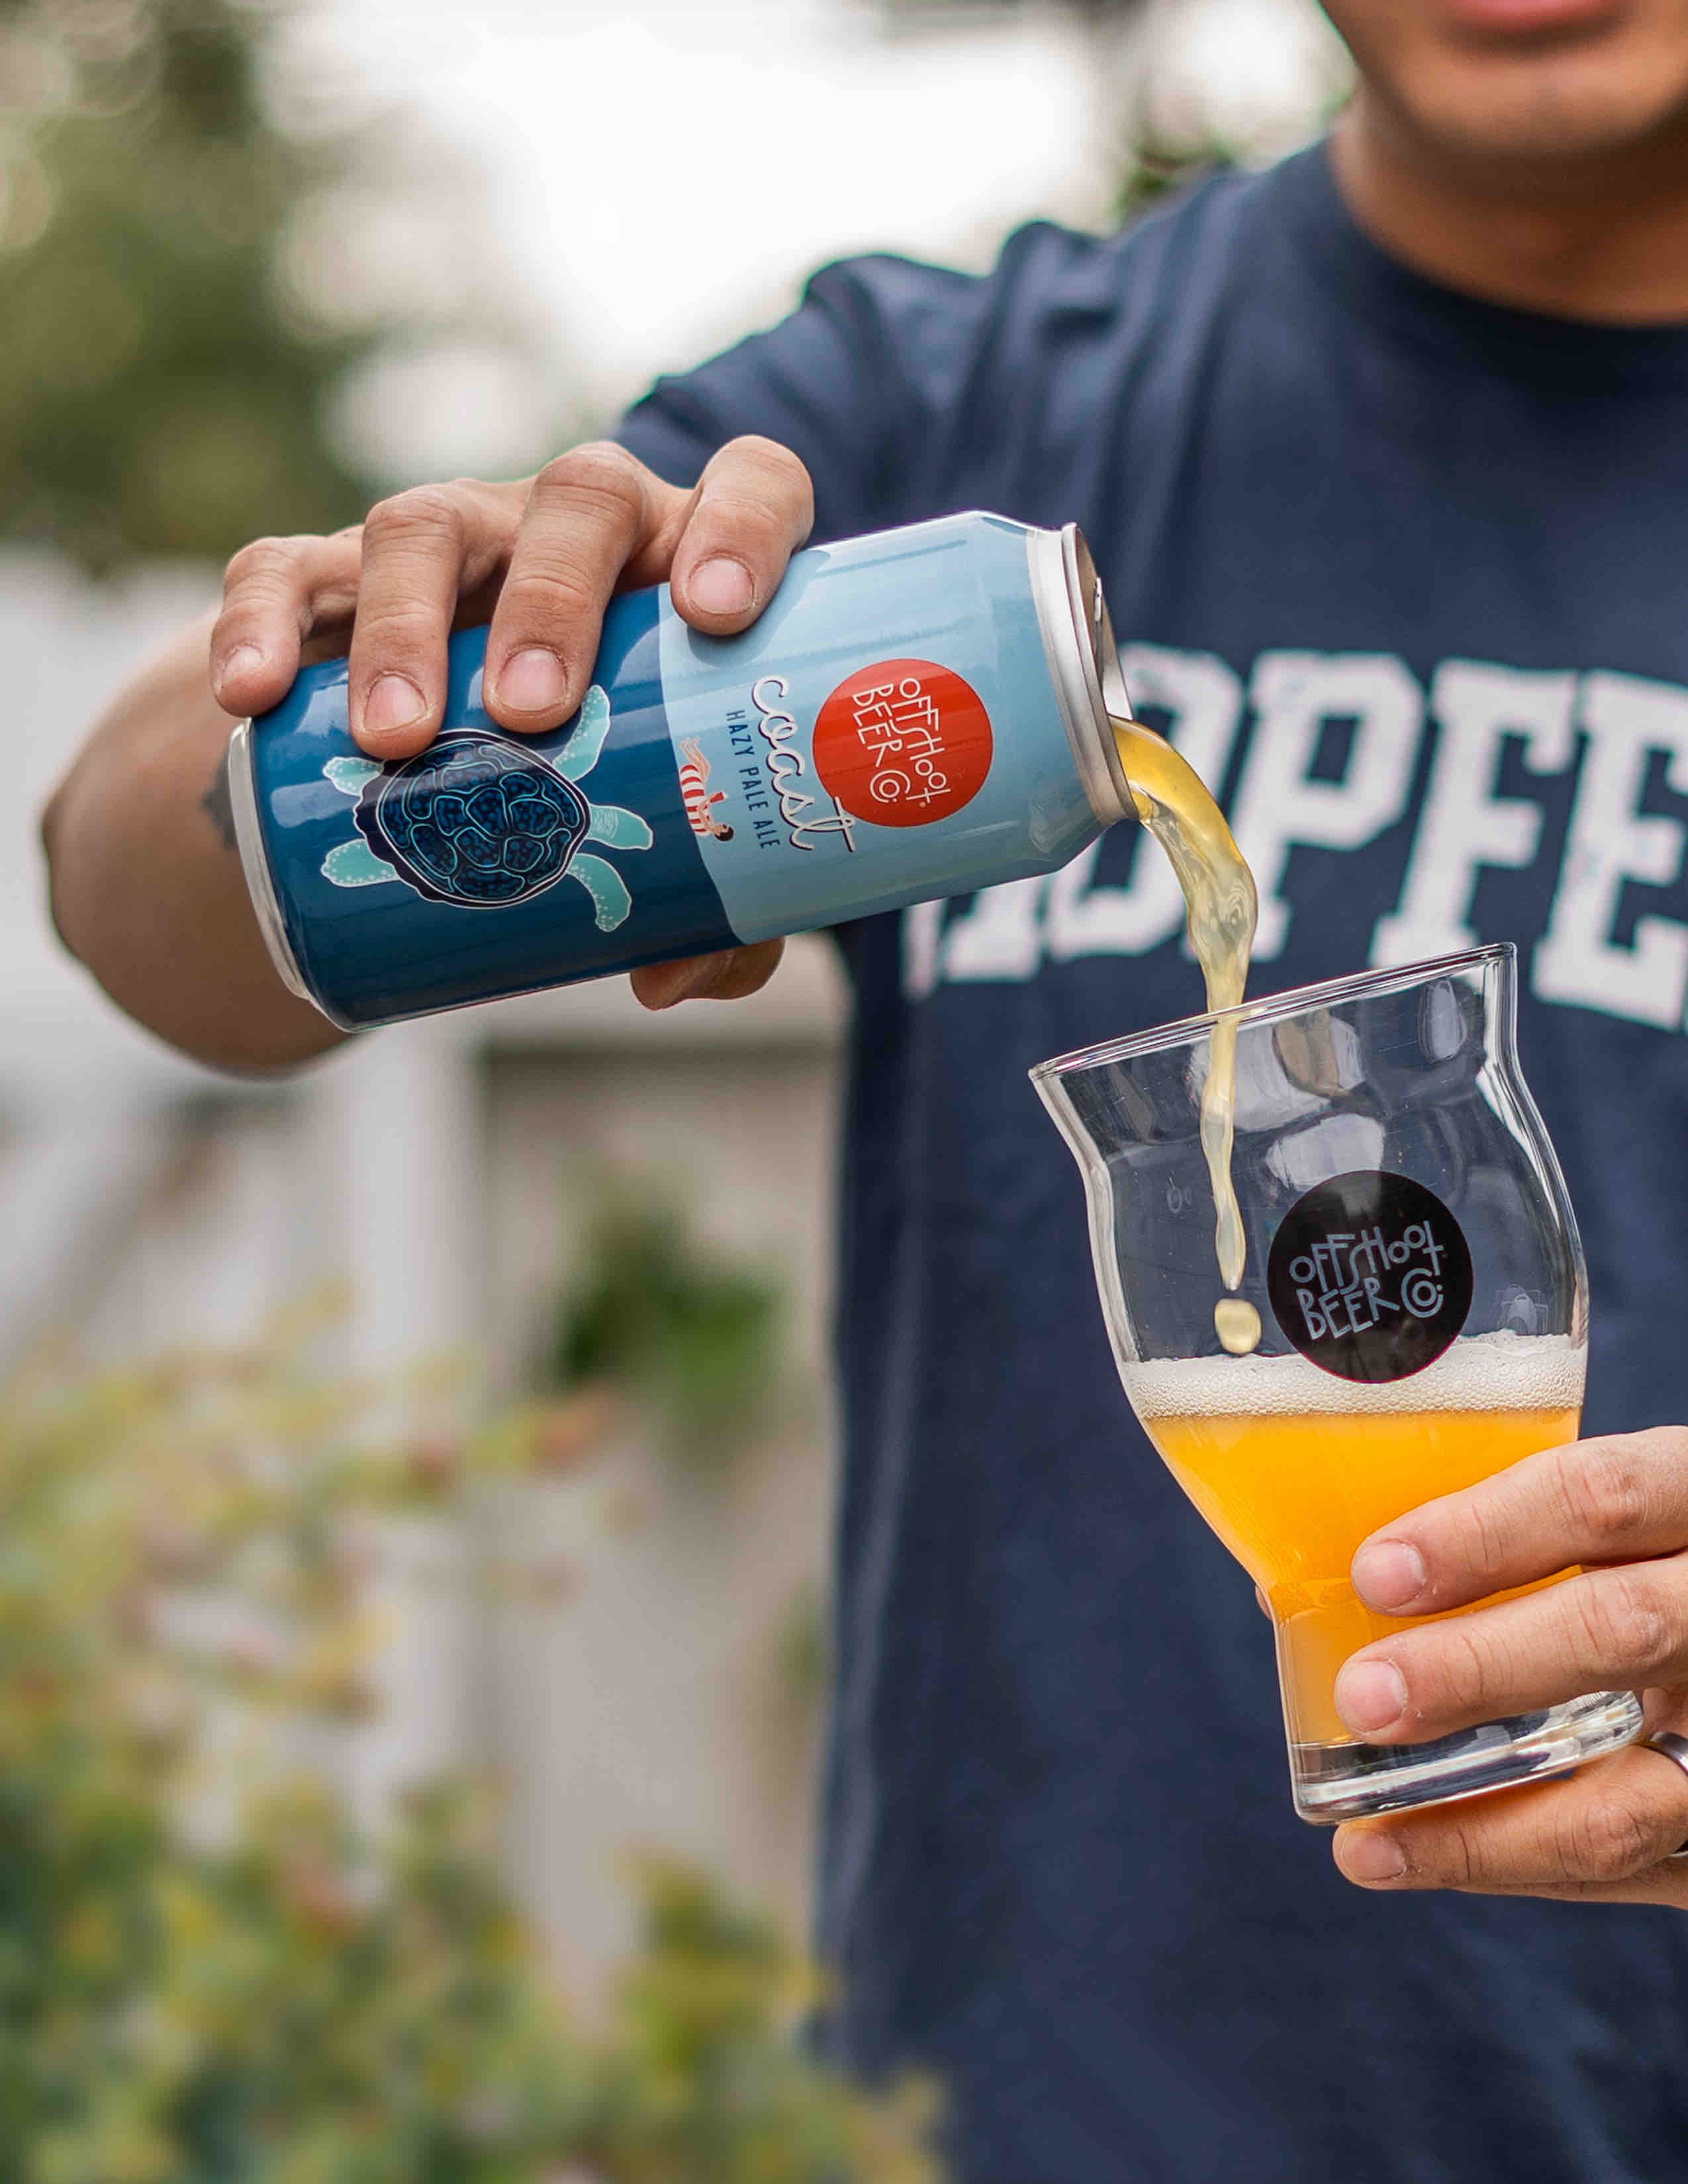 image of Coast (An Anytime Hazy Pale Ale) courtesy of Offshoot Beer Co.